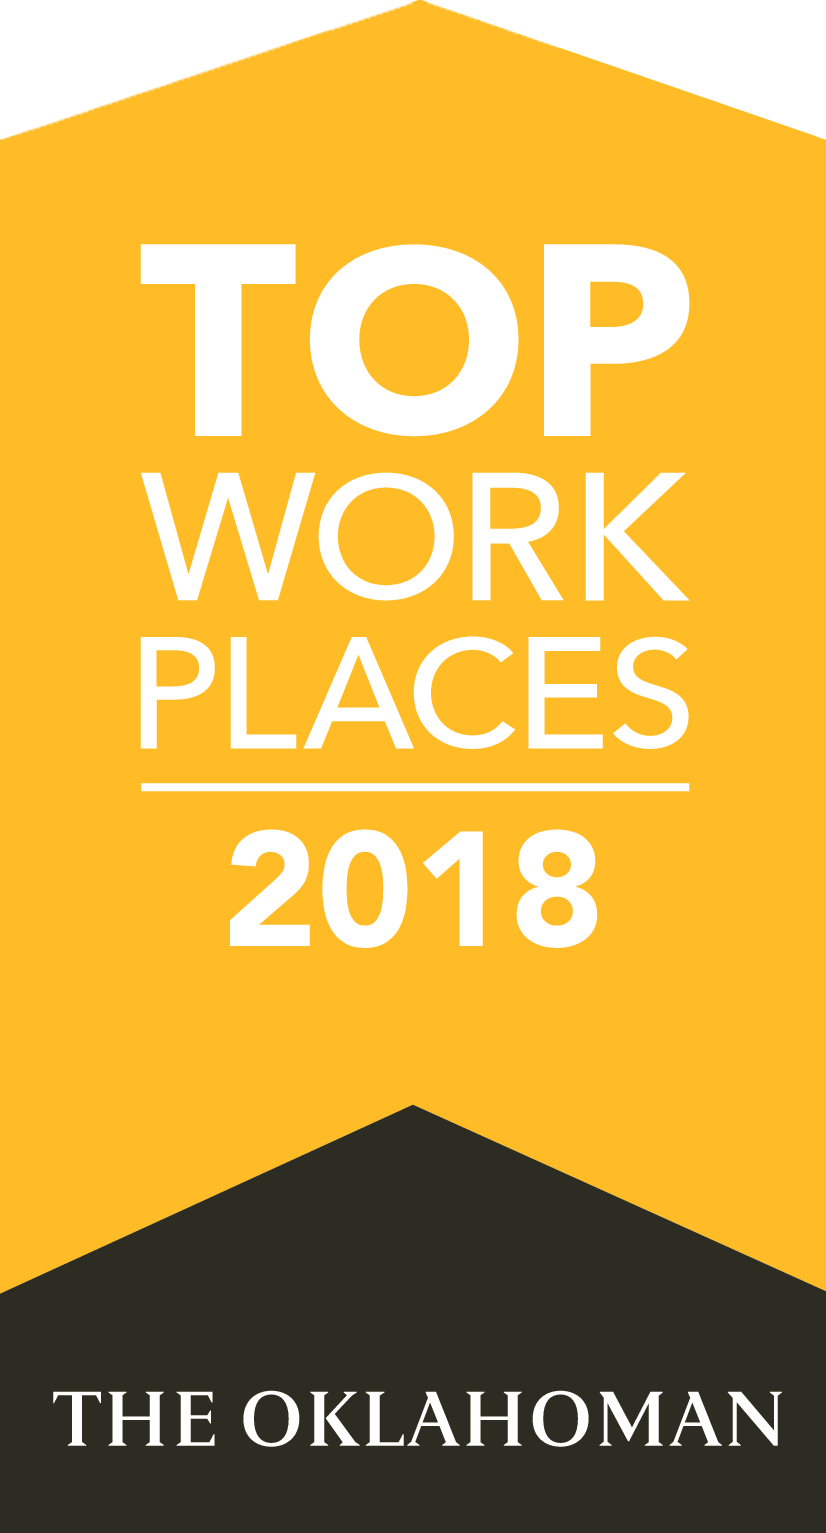 Oklahoma Top Work Places 2018